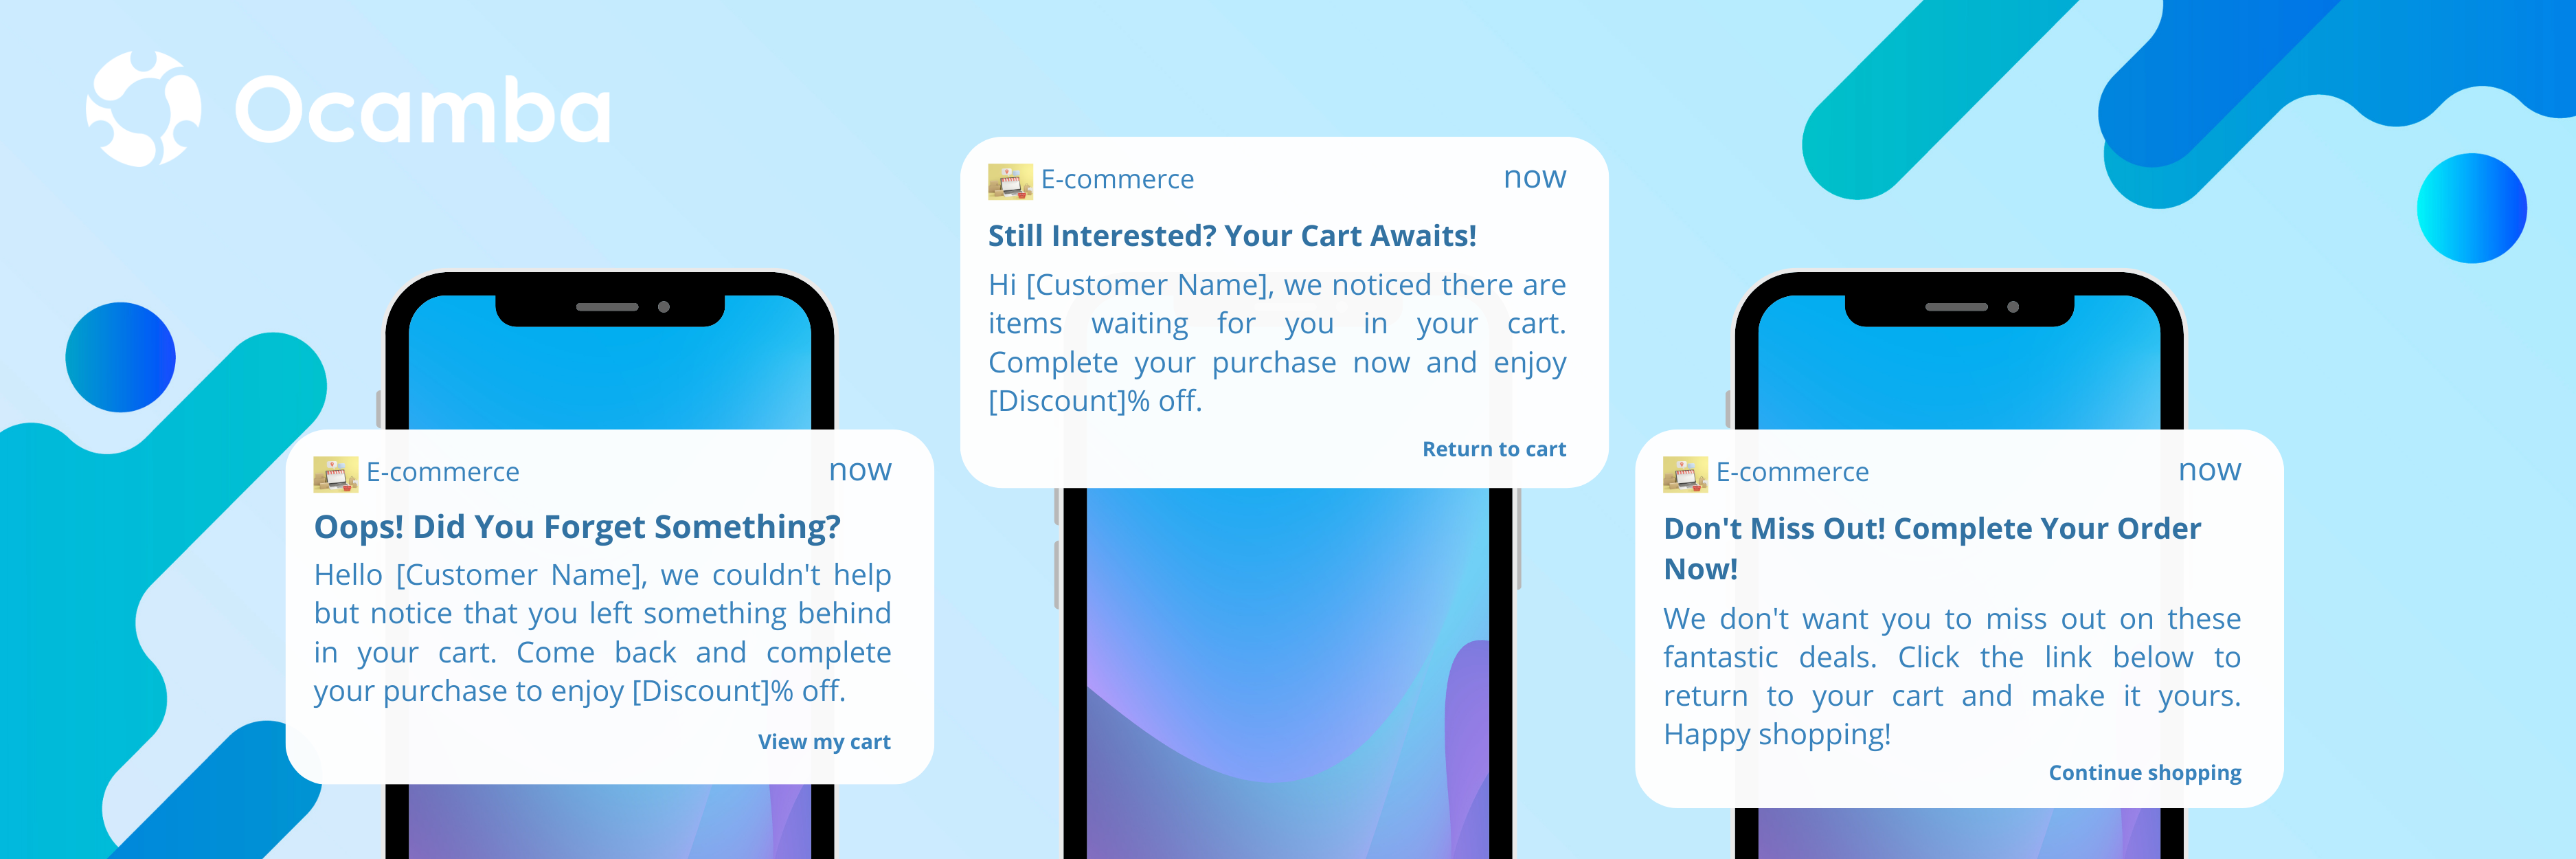 Ecommerce push notifications templates for abandoned cart